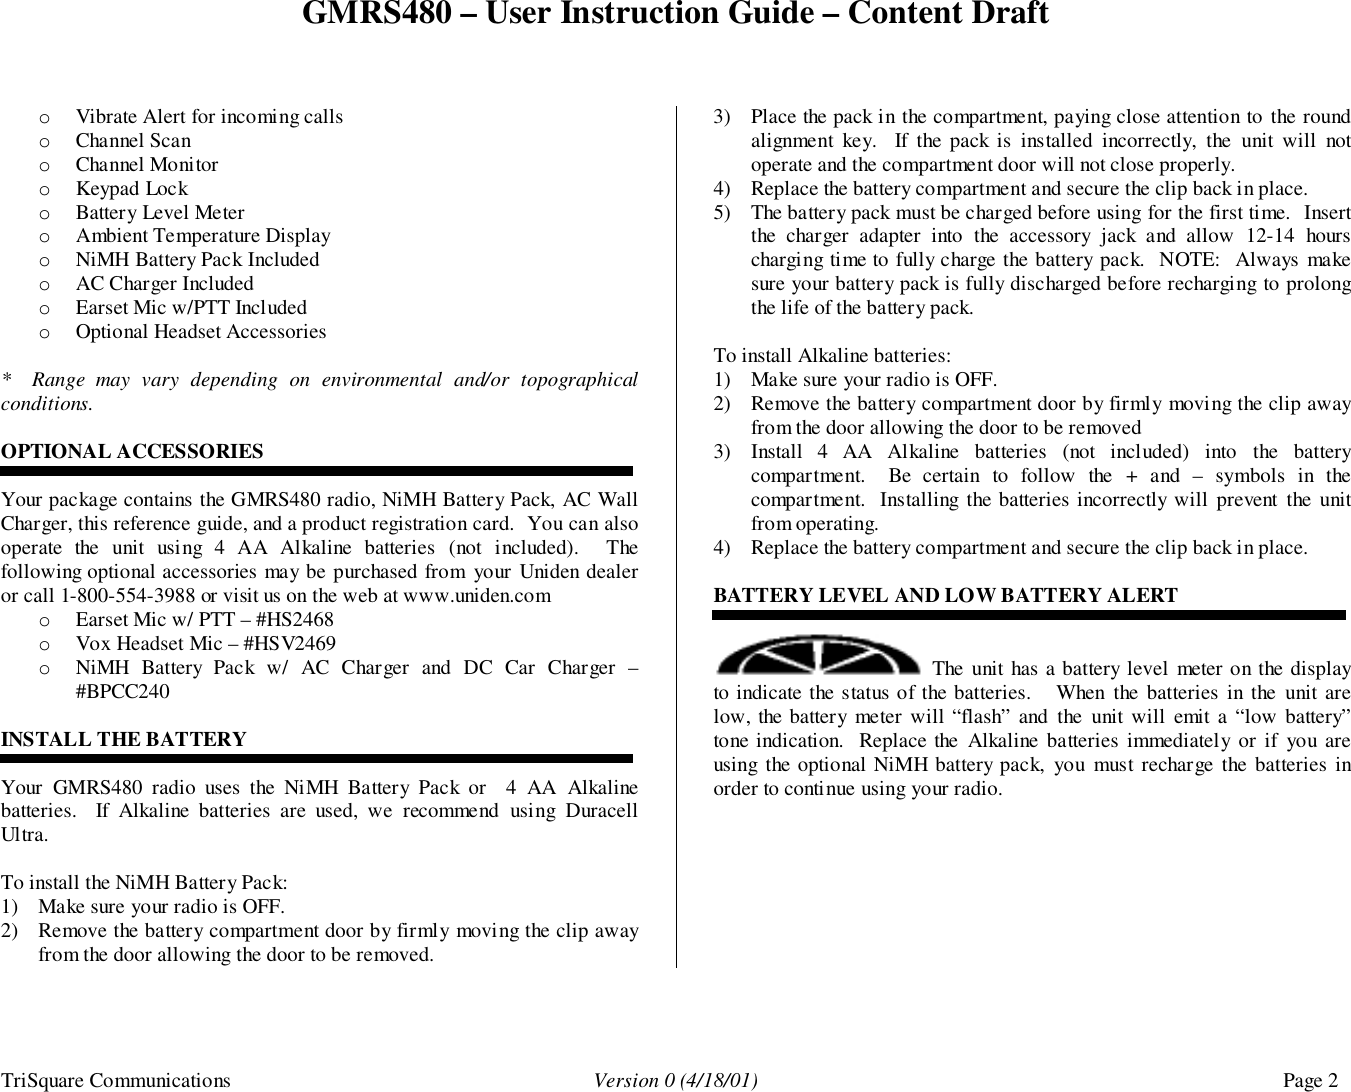 GMRS480 – User Instruction Guide – Content DraftTriSquare Communications Version 0 (4/18/01) Page 2o Vibrate Alert for incoming callso Channel Scano Channel Monitoro Keypad Locko Battery Level Metero Ambient Temperature Displayo NiMH Battery Pack Includedo AC Charger Includedo Earset Mic w/PTT Includedo Optional Headset Accessories*  Range may vary depending on environmental and/or topographicalconditions.OPTIONAL ACCESSORIESYour package contains the GMRS480 radio, NiMH Battery Pack, AC WallCharger, this reference guide, and a product registration card.  You can alsooperate the unit using 4 AA Alkaline batteries (not included).  Thefollowing optional accessories may be purchased from your Uniden dealeror call 1-800-554-3988 or visit us on the web at www.uniden.como Earset Mic w/ PTT – #HS2468o Vox Headset Mic – #HSV2469o NiMH Battery Pack w/ AC Charger and DC Car Charger –#BPCC240INSTALL THE BATTERYYour GMRS480 radio uses the NiMH Battery Pack or  4 AA Alkalinebatteries.  If Alkaline batteries are used, we recommend using DuracellUltra.To install the NiMH Battery Pack:1) Make sure your radio is OFF.2) Remove the battery compartment door by firmly moving the clip awayfrom the door allowing the door to be removed.3) Place the pack in the compartment, paying close attention to the roundalignment key.  If the pack is installed incorrectly, the unit will notoperate and the compartment door will not close properly.4) Replace the battery compartment and secure the clip back in place.5) The battery pack must be charged before using for the first time.  Insertthe charger adapter into the accessory jack and allow 12-14 hourscharging time to fully charge the battery pack.  NOTE:  Always makesure your battery pack is fully discharged before recharging to prolongthe life of the battery pack.To install Alkaline batteries:1) Make sure your radio is OFF.2) Remove the battery compartment door by firmly moving the clip awayfrom the door allowing the door to be removed3) Install 4 AA Alkaline batteries (not included) into the batterycompartment.  Be certain to follow the + and – symbols in thecompartment.  Installing the batteries incorrectly will prevent the unitfrom operating.4) Replace the battery compartment and secure the clip back in place.BATTERY LEVEL AND LOW BATTERY ALERT The unit has a battery level meter on the displayto indicate the status of the batteries.   When the batteries in the unit arelow, the battery meter will “flash” and the unit will emit a “low battery”tone indication.  Replace the Alkaline batteries immediately or if you areusing the optional NiMH battery pack, you must recharge the batteries inorder to continue using your radio.